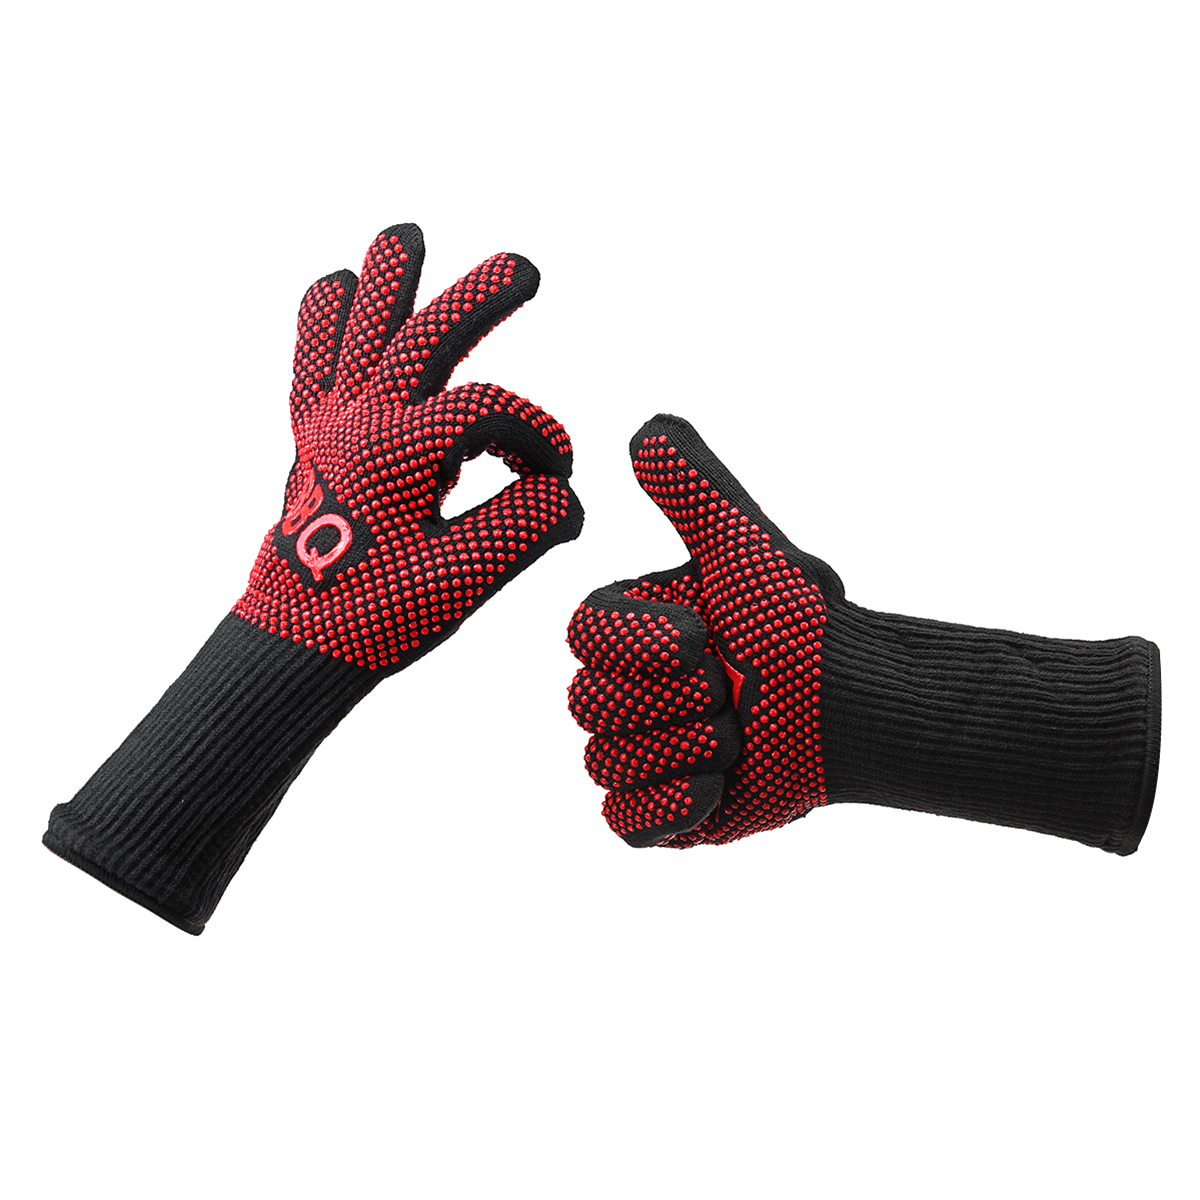 1-Pair-662degF-Heat-Proof-Resistant-Barbecue-BBQ-Grilling-Gloves-Kitchen-Cooking-Work-1364219